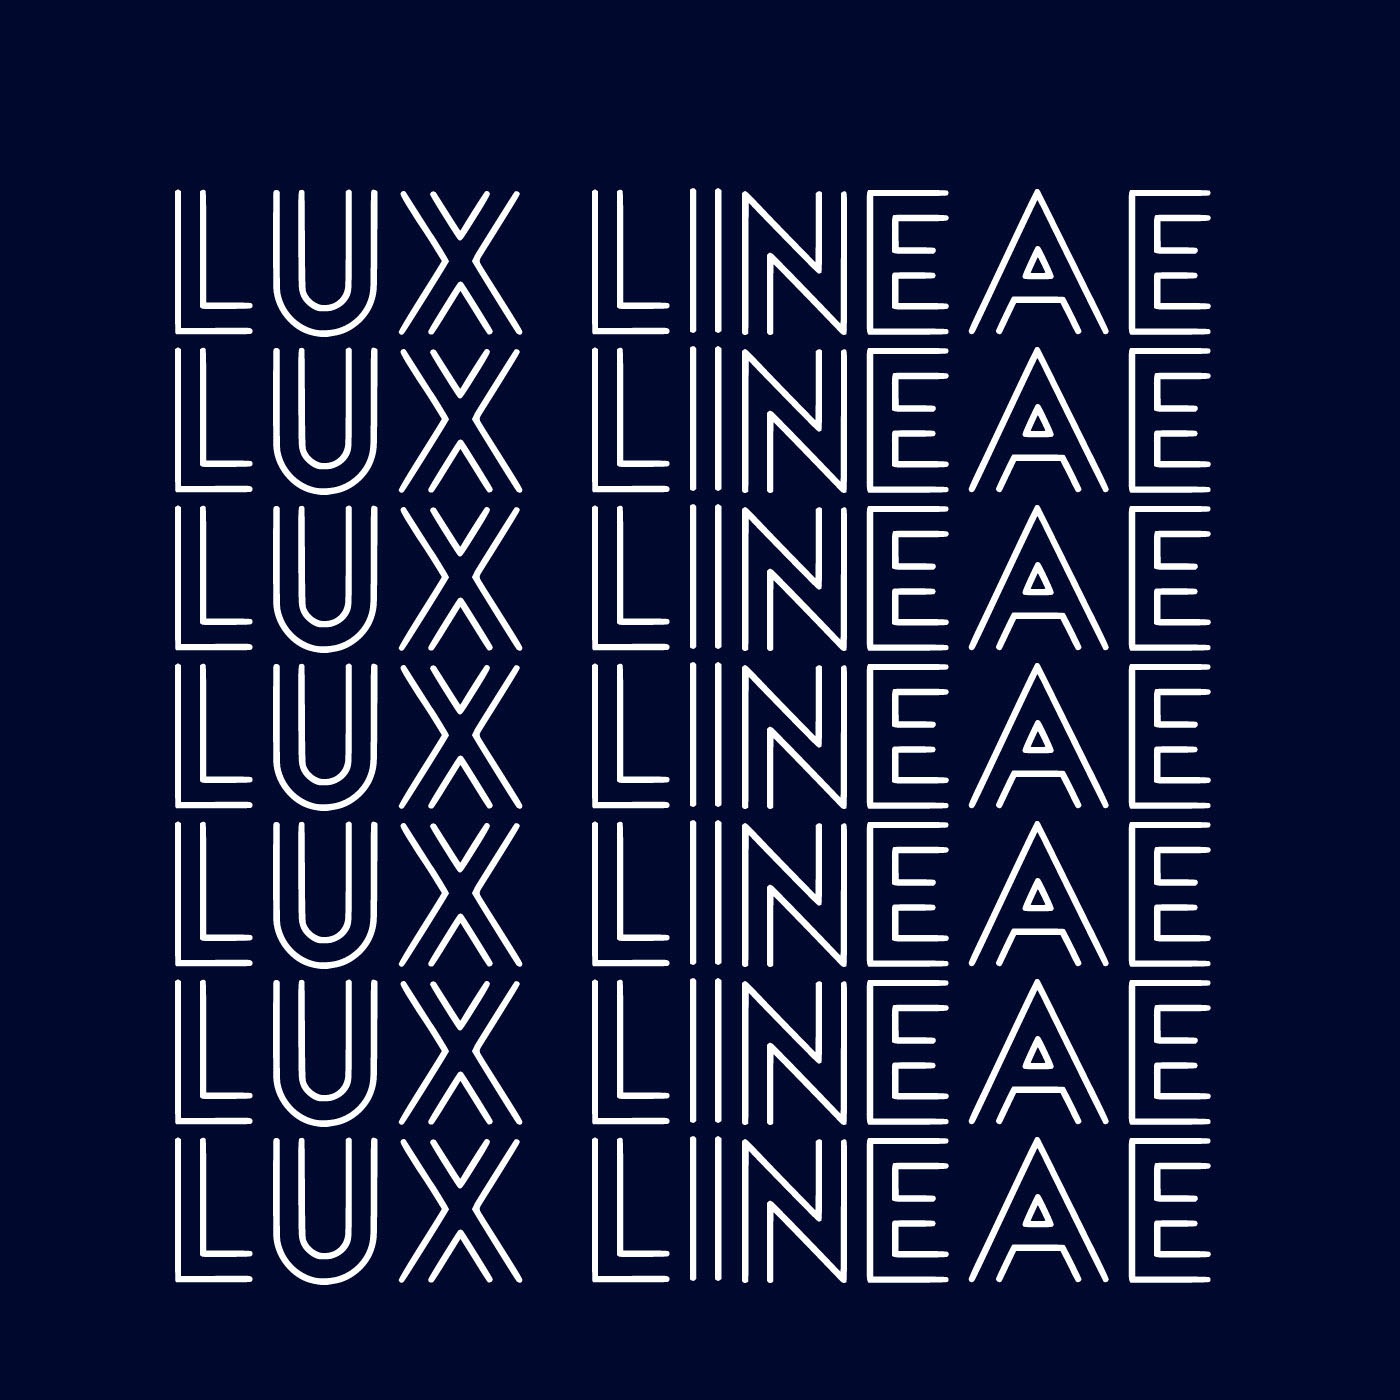 Example font Lux Lineae #3